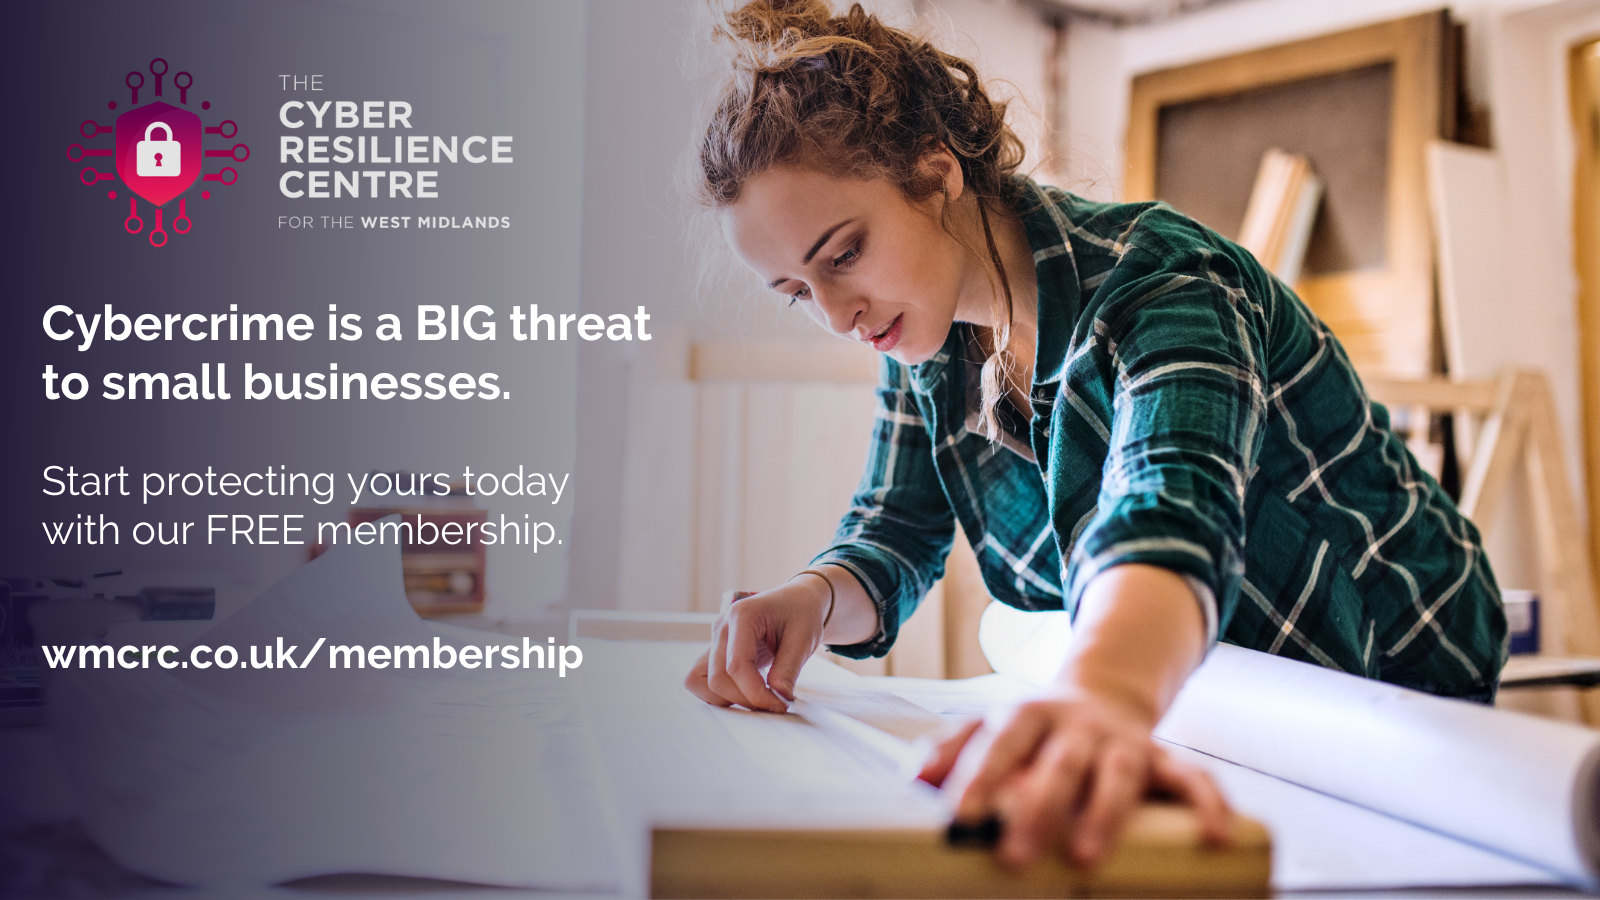 How can the WMCRC's free membership protect your business from cyber attacks